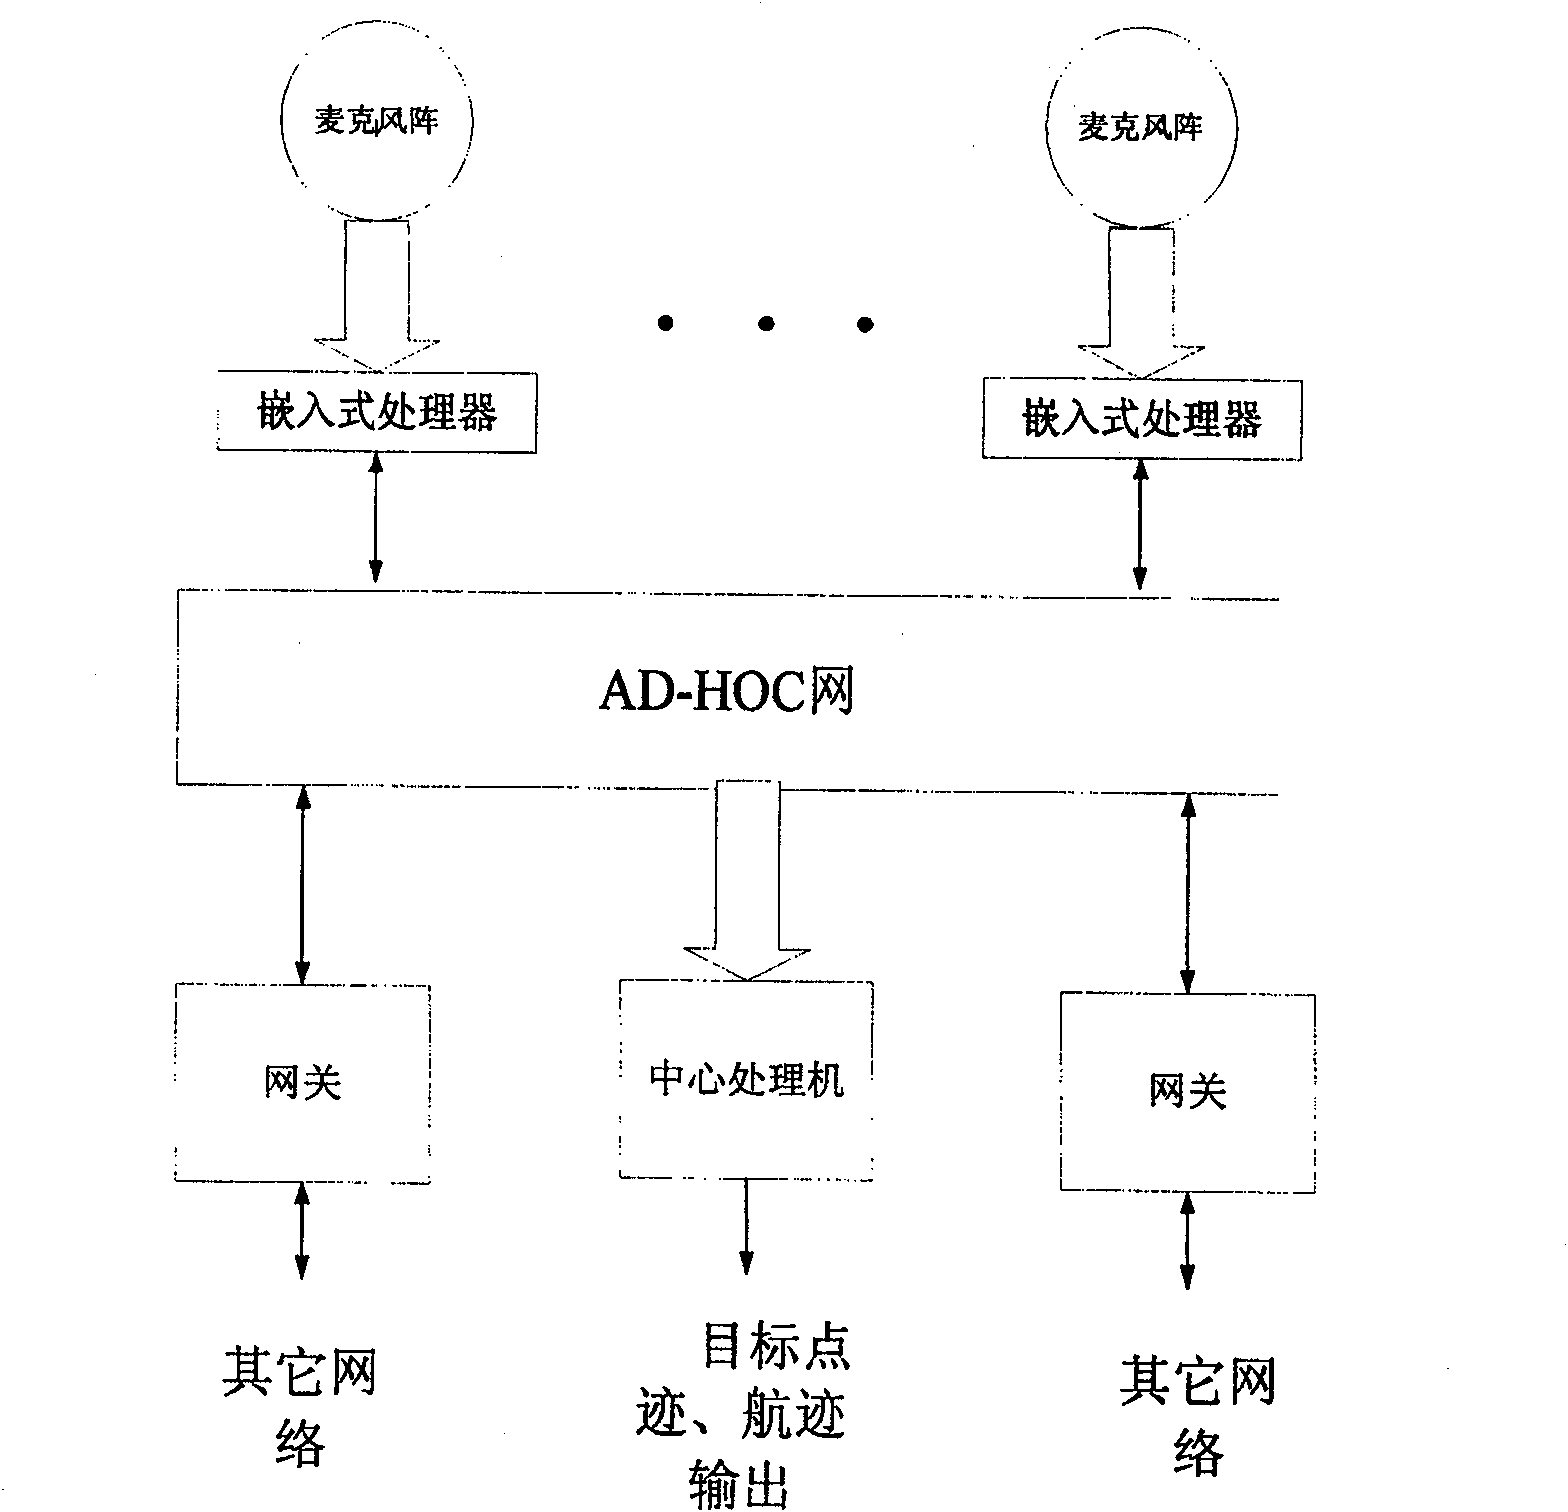 Low altitude target monitoring method based on microphones array network